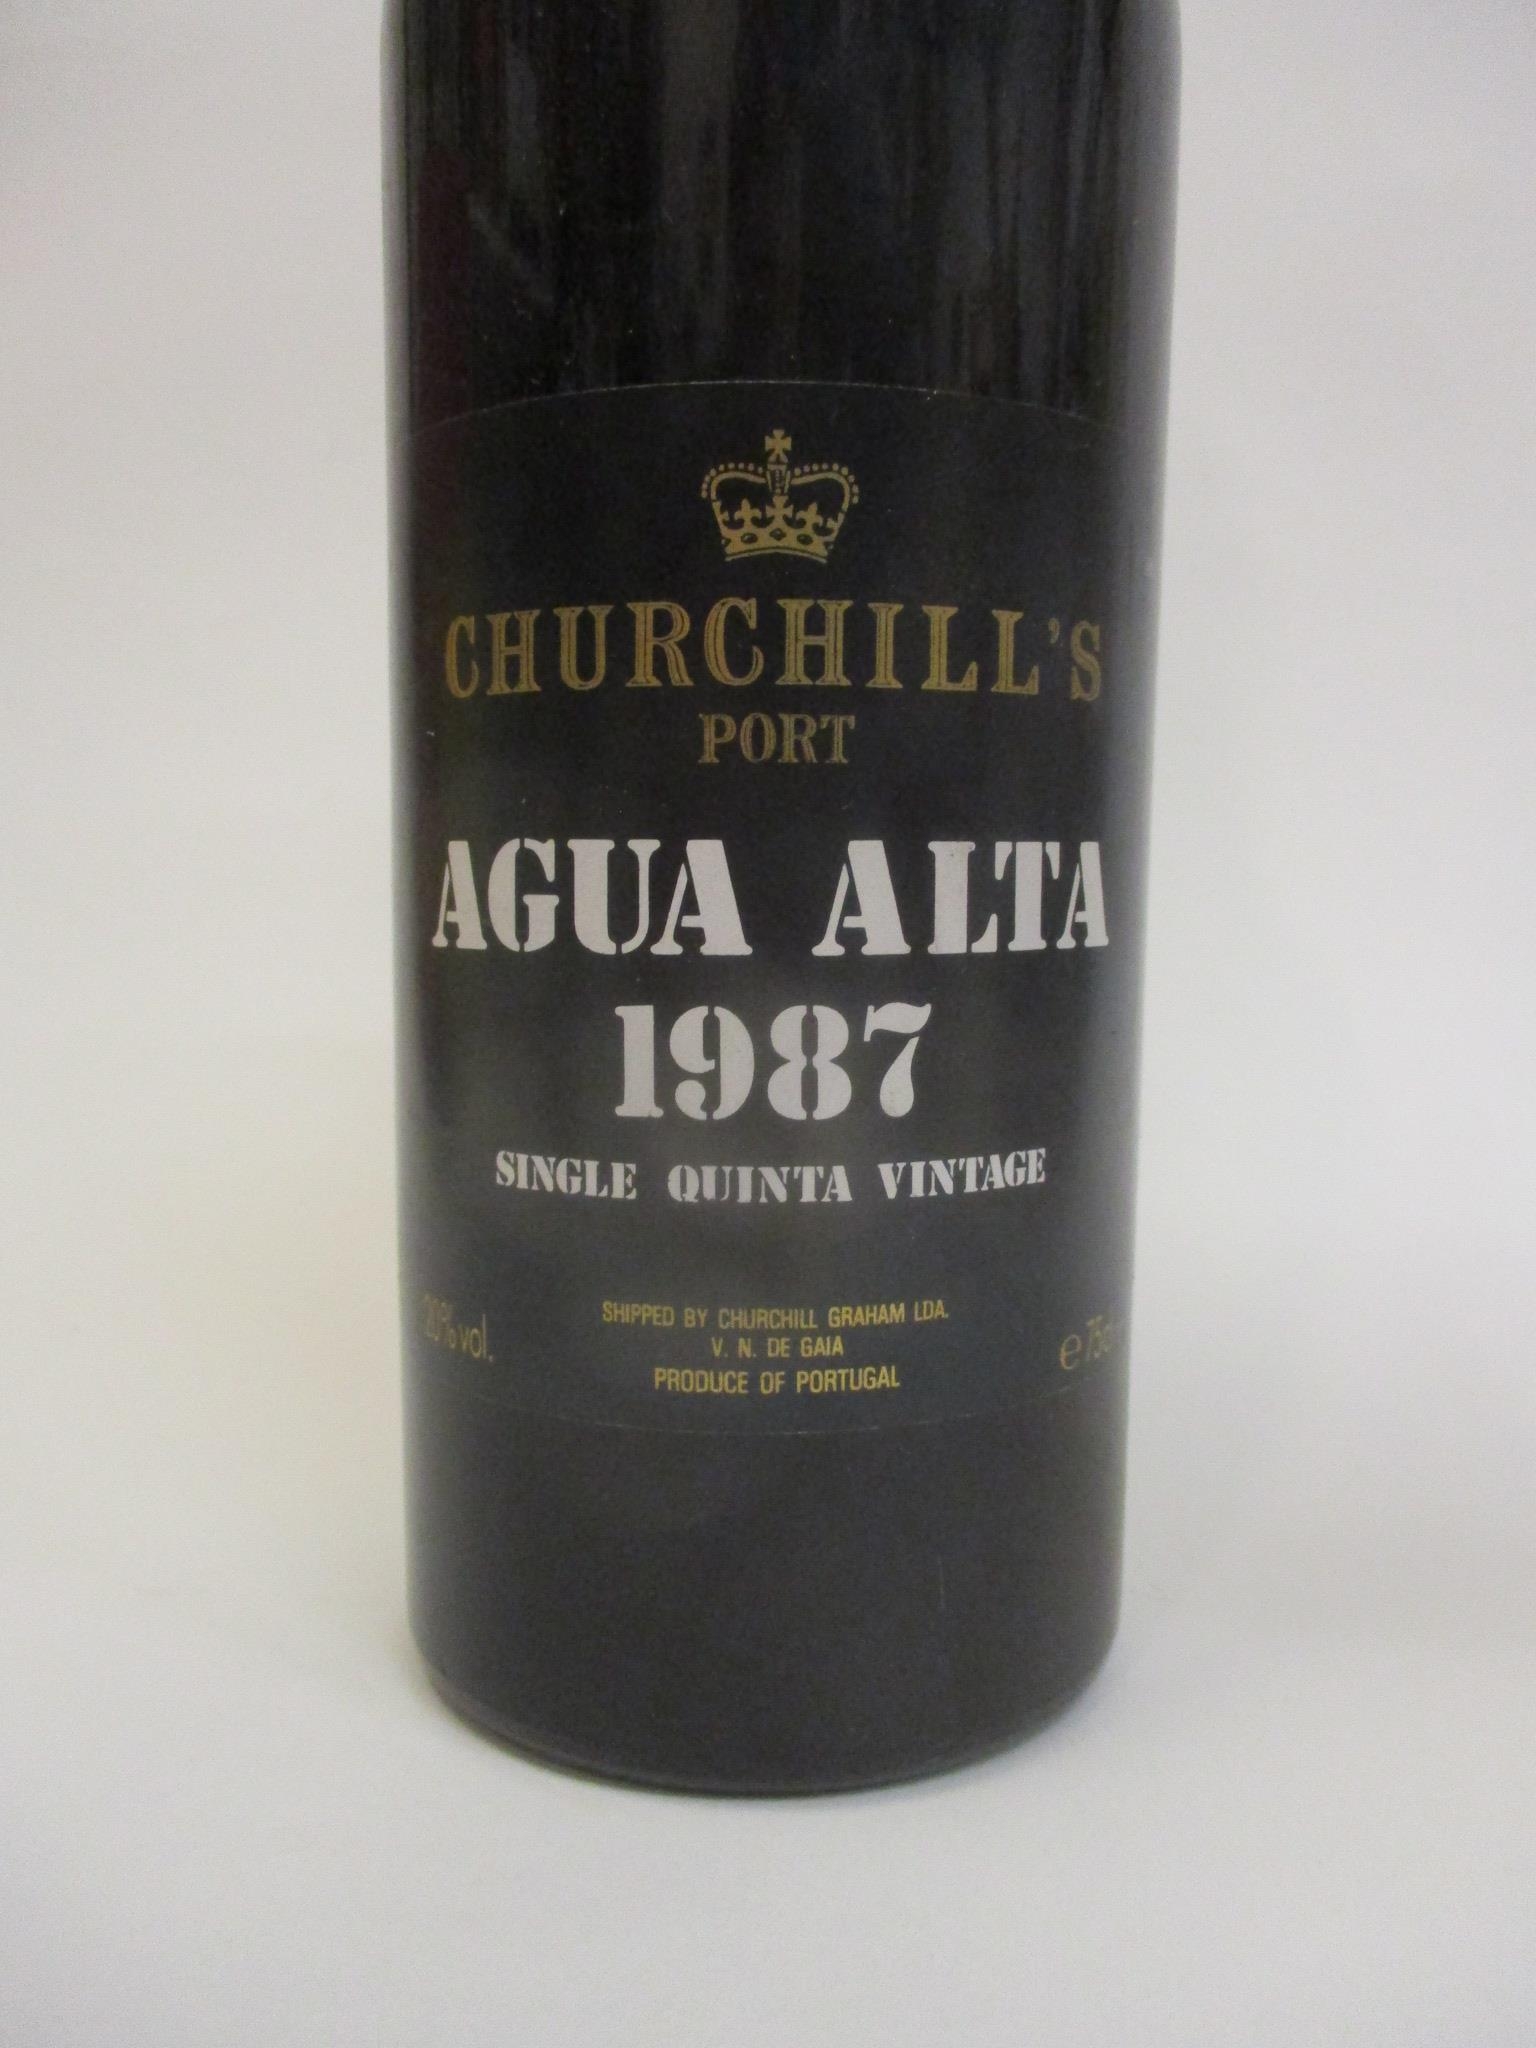 One bottle of Churchill Port Agua Alta, 1987 Vintage, 75cl - Image 2 of 3